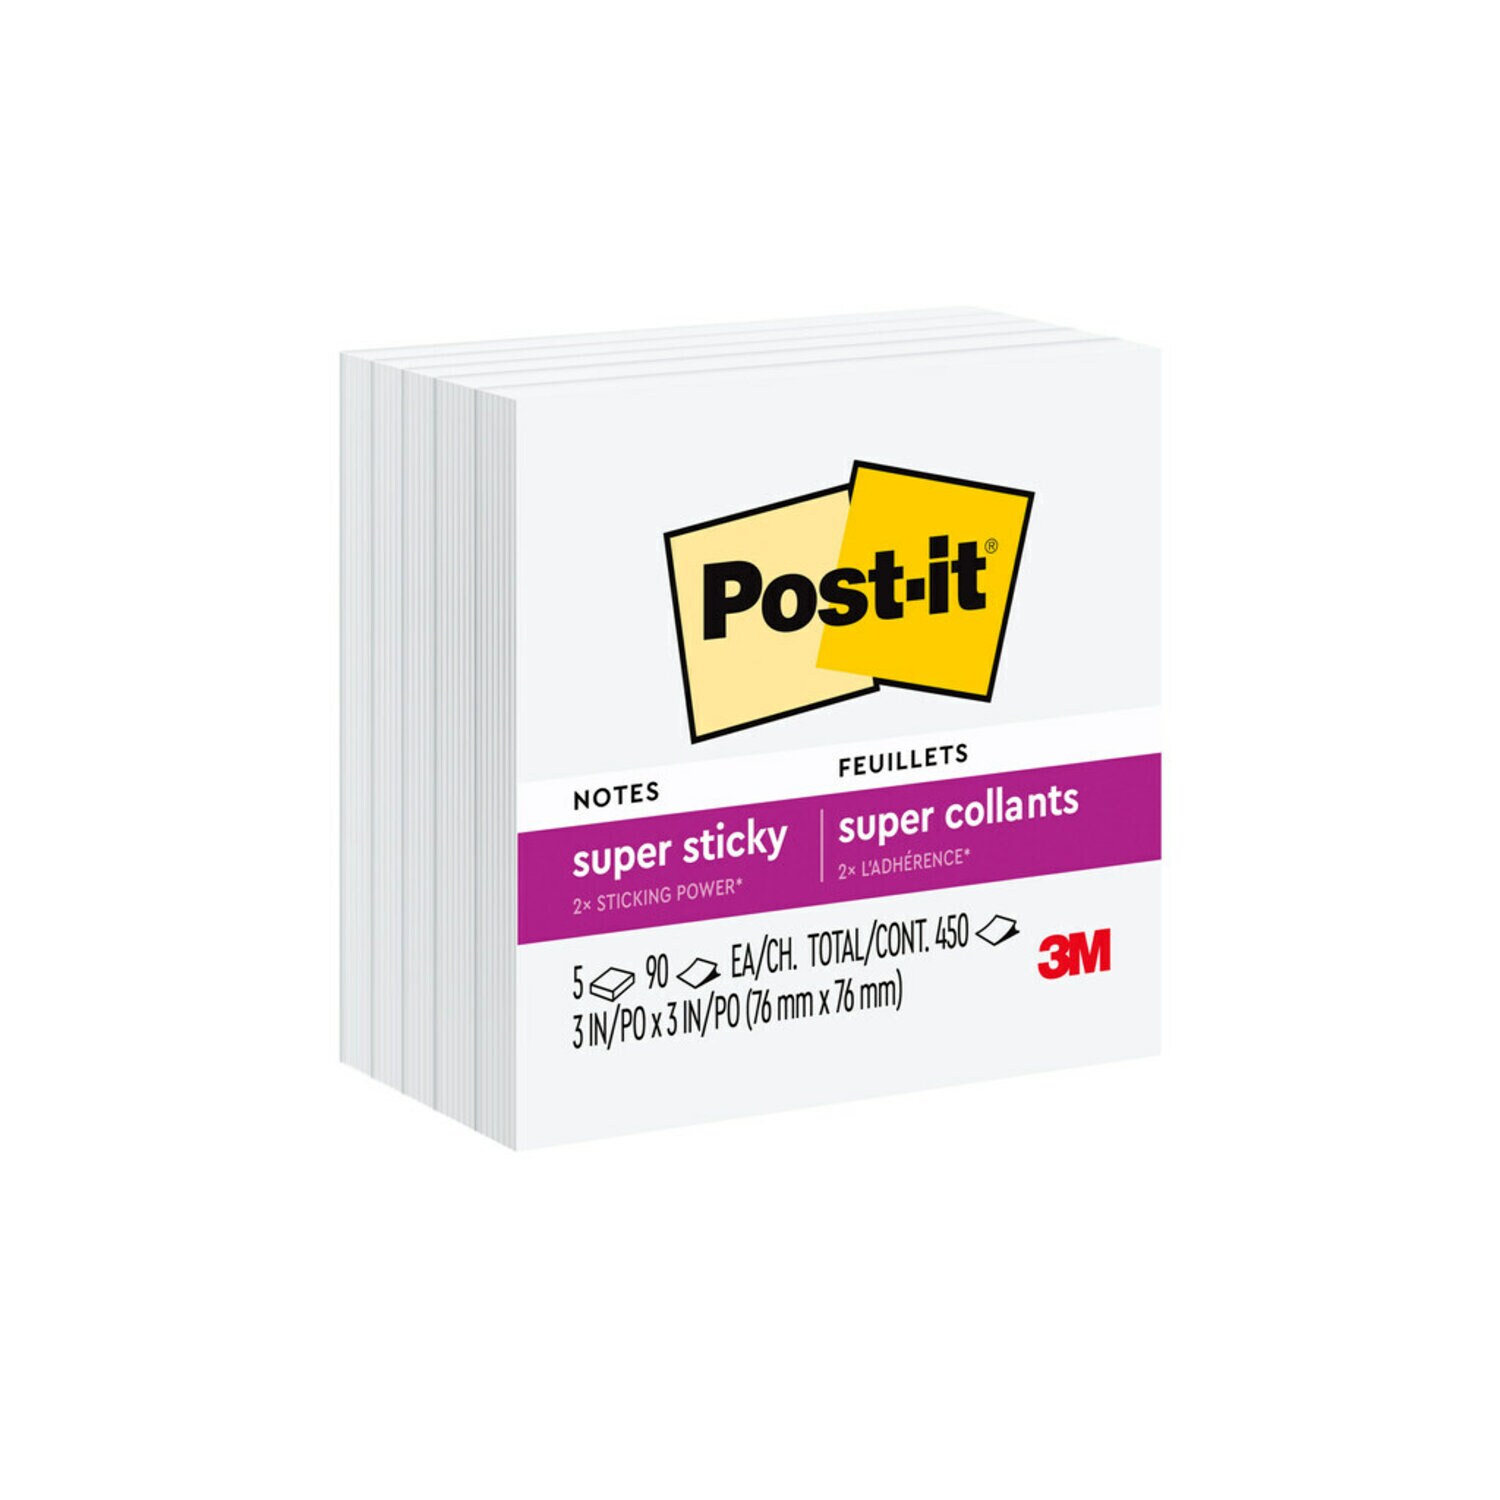 7100230184 - Post-it Super Sticky Notes 654-5SSW, 3 in x 3 in (76 mm x 76 mm), White